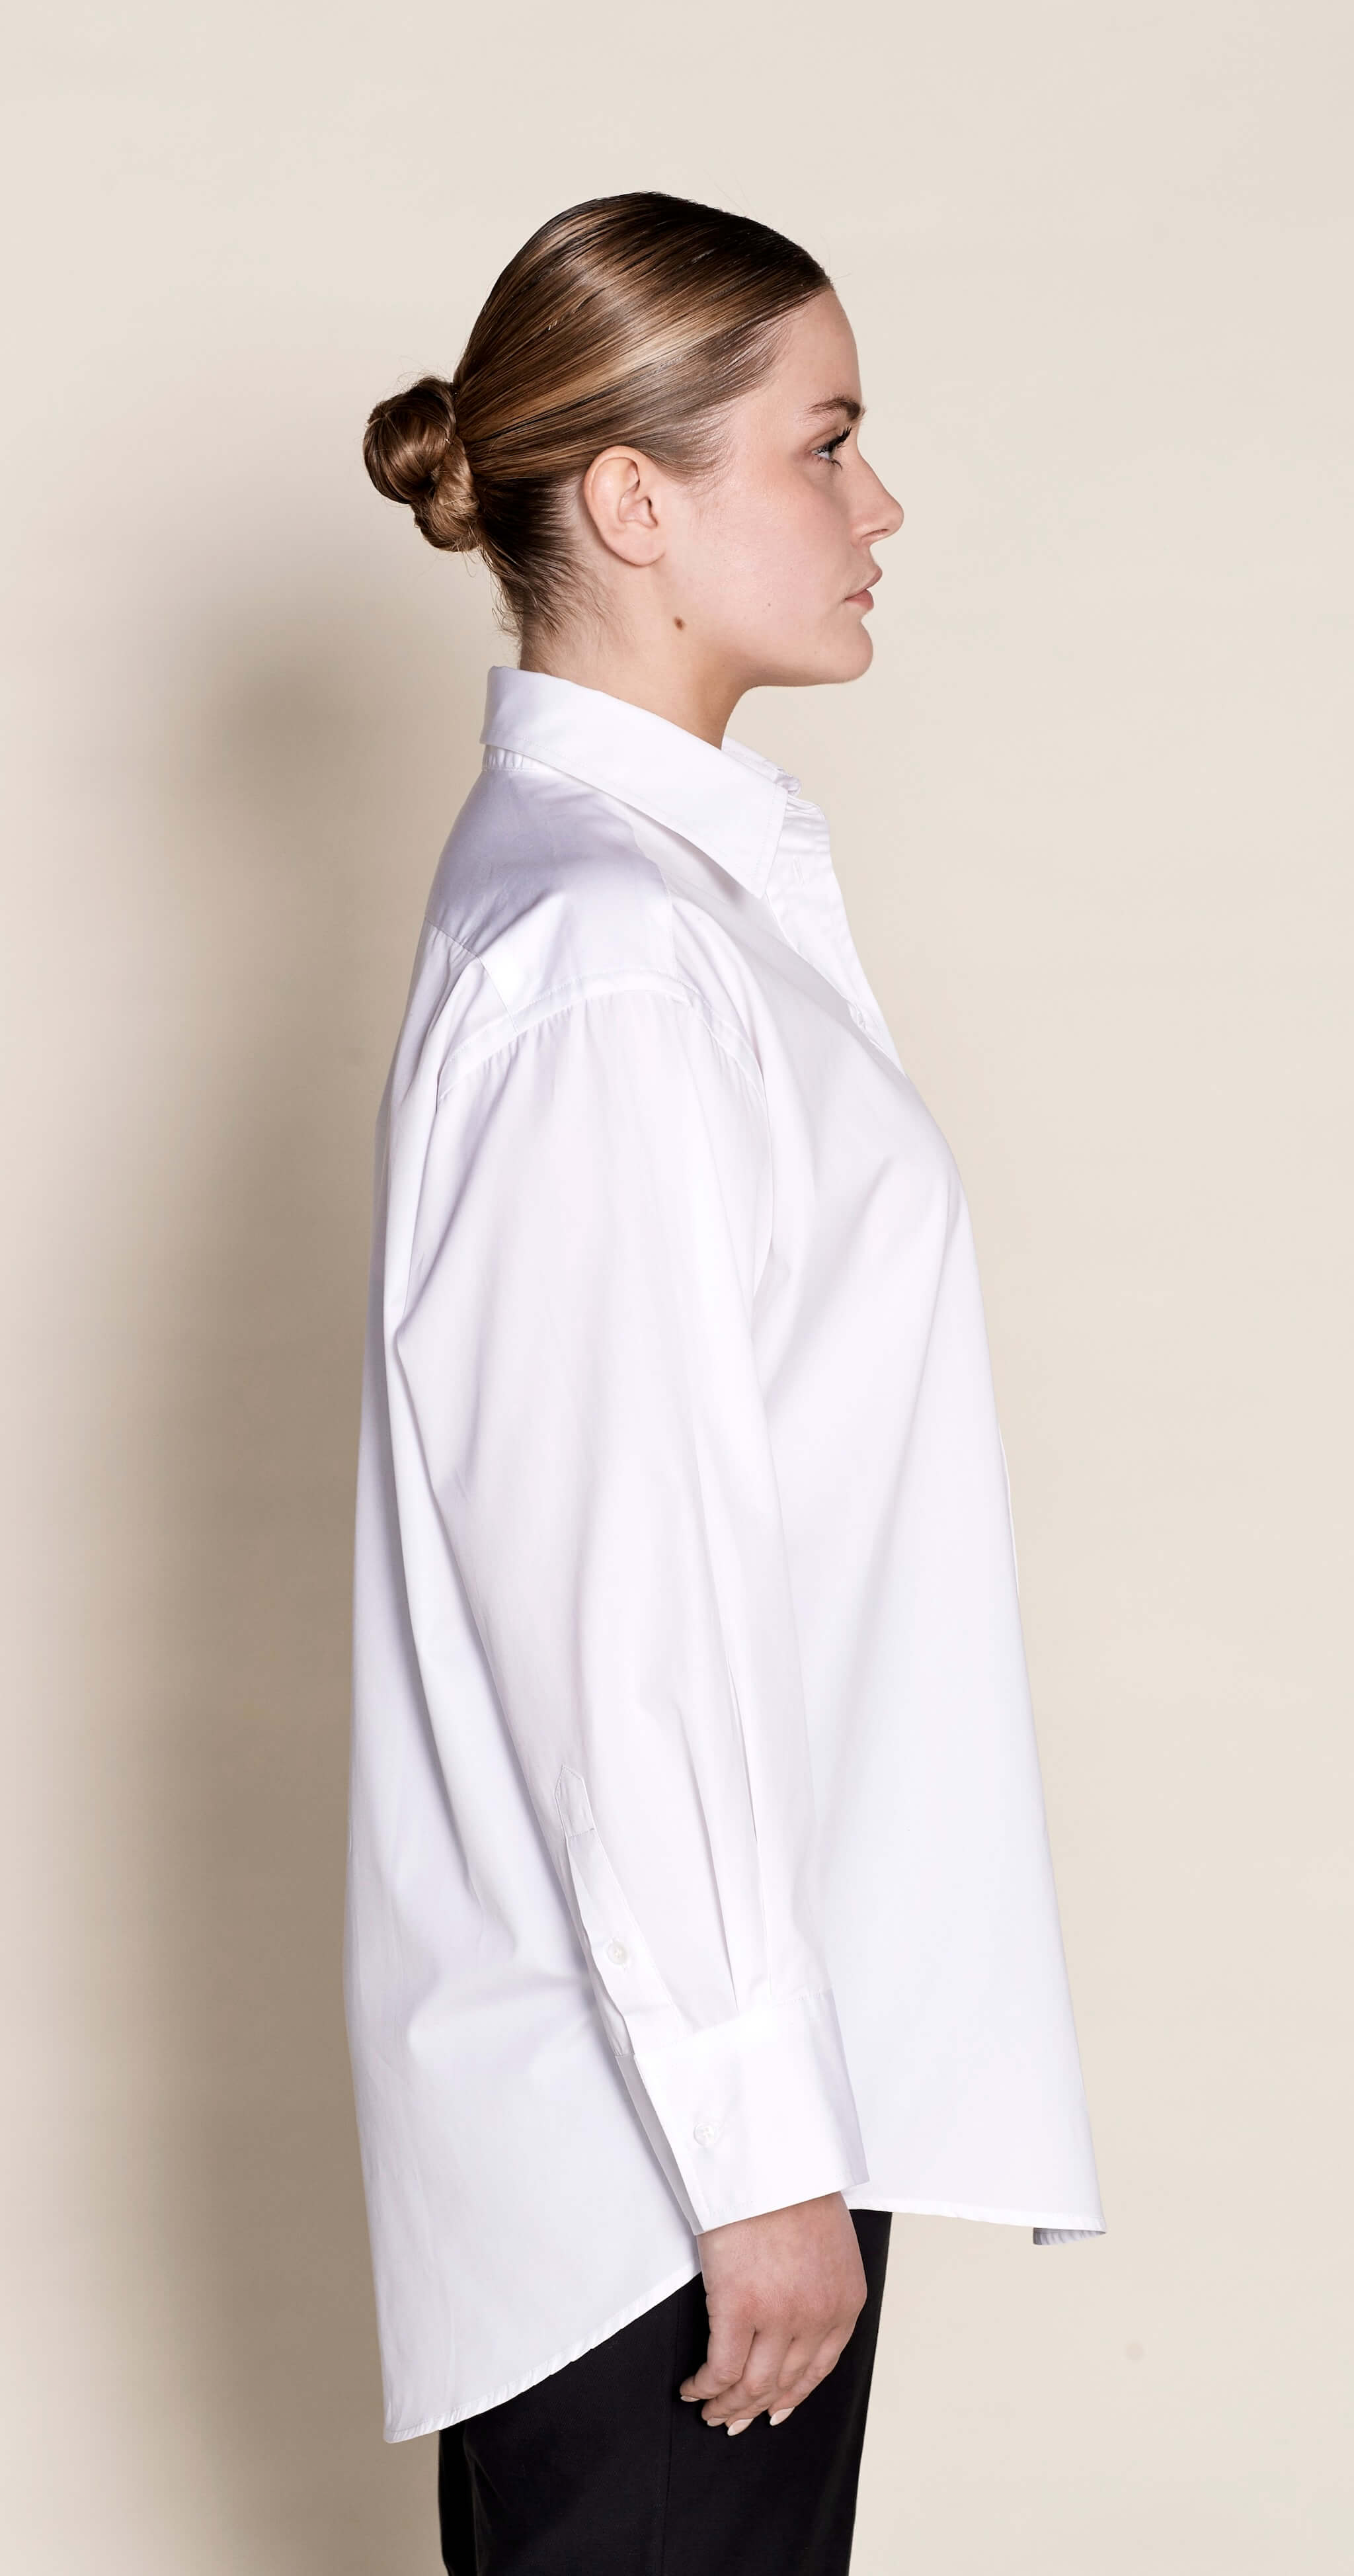 Side profile of a Cyme Copenhagen classic white shirt, displaying the relaxed fit and elegant tailoring that make it a timeless wardrobe essential for sustainable Scandinavian style.